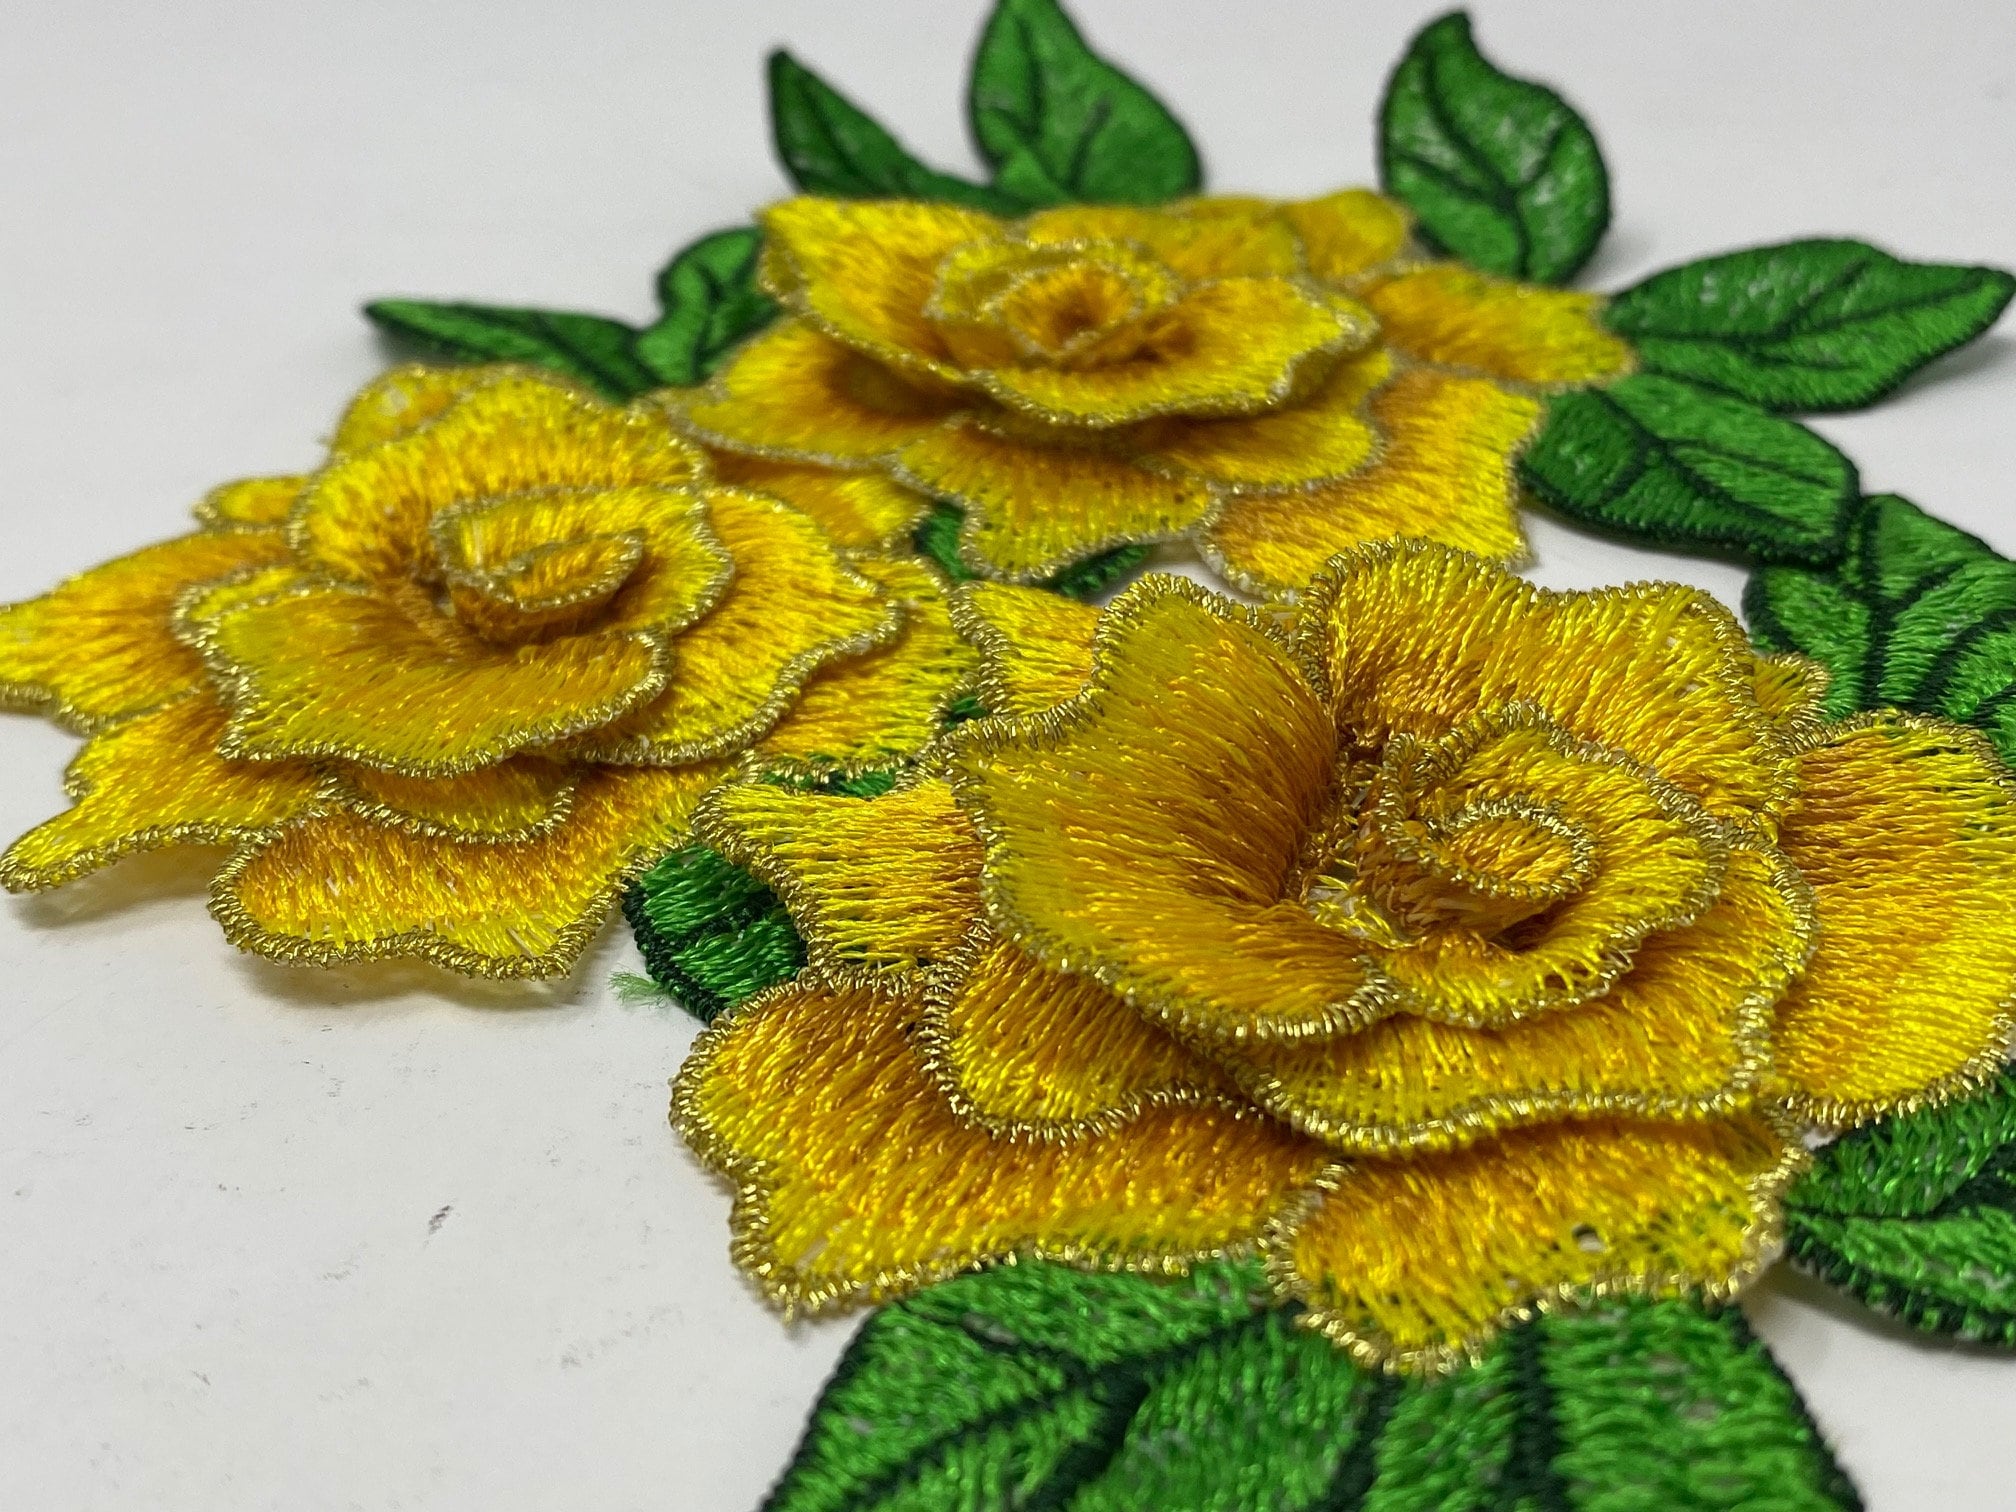 NEW,  2 pc set, Yellow & Gold Roses (size 4-inches), matching lace sew-on floral patches (2 pcs), Flower Patches, Rose Lace Patches